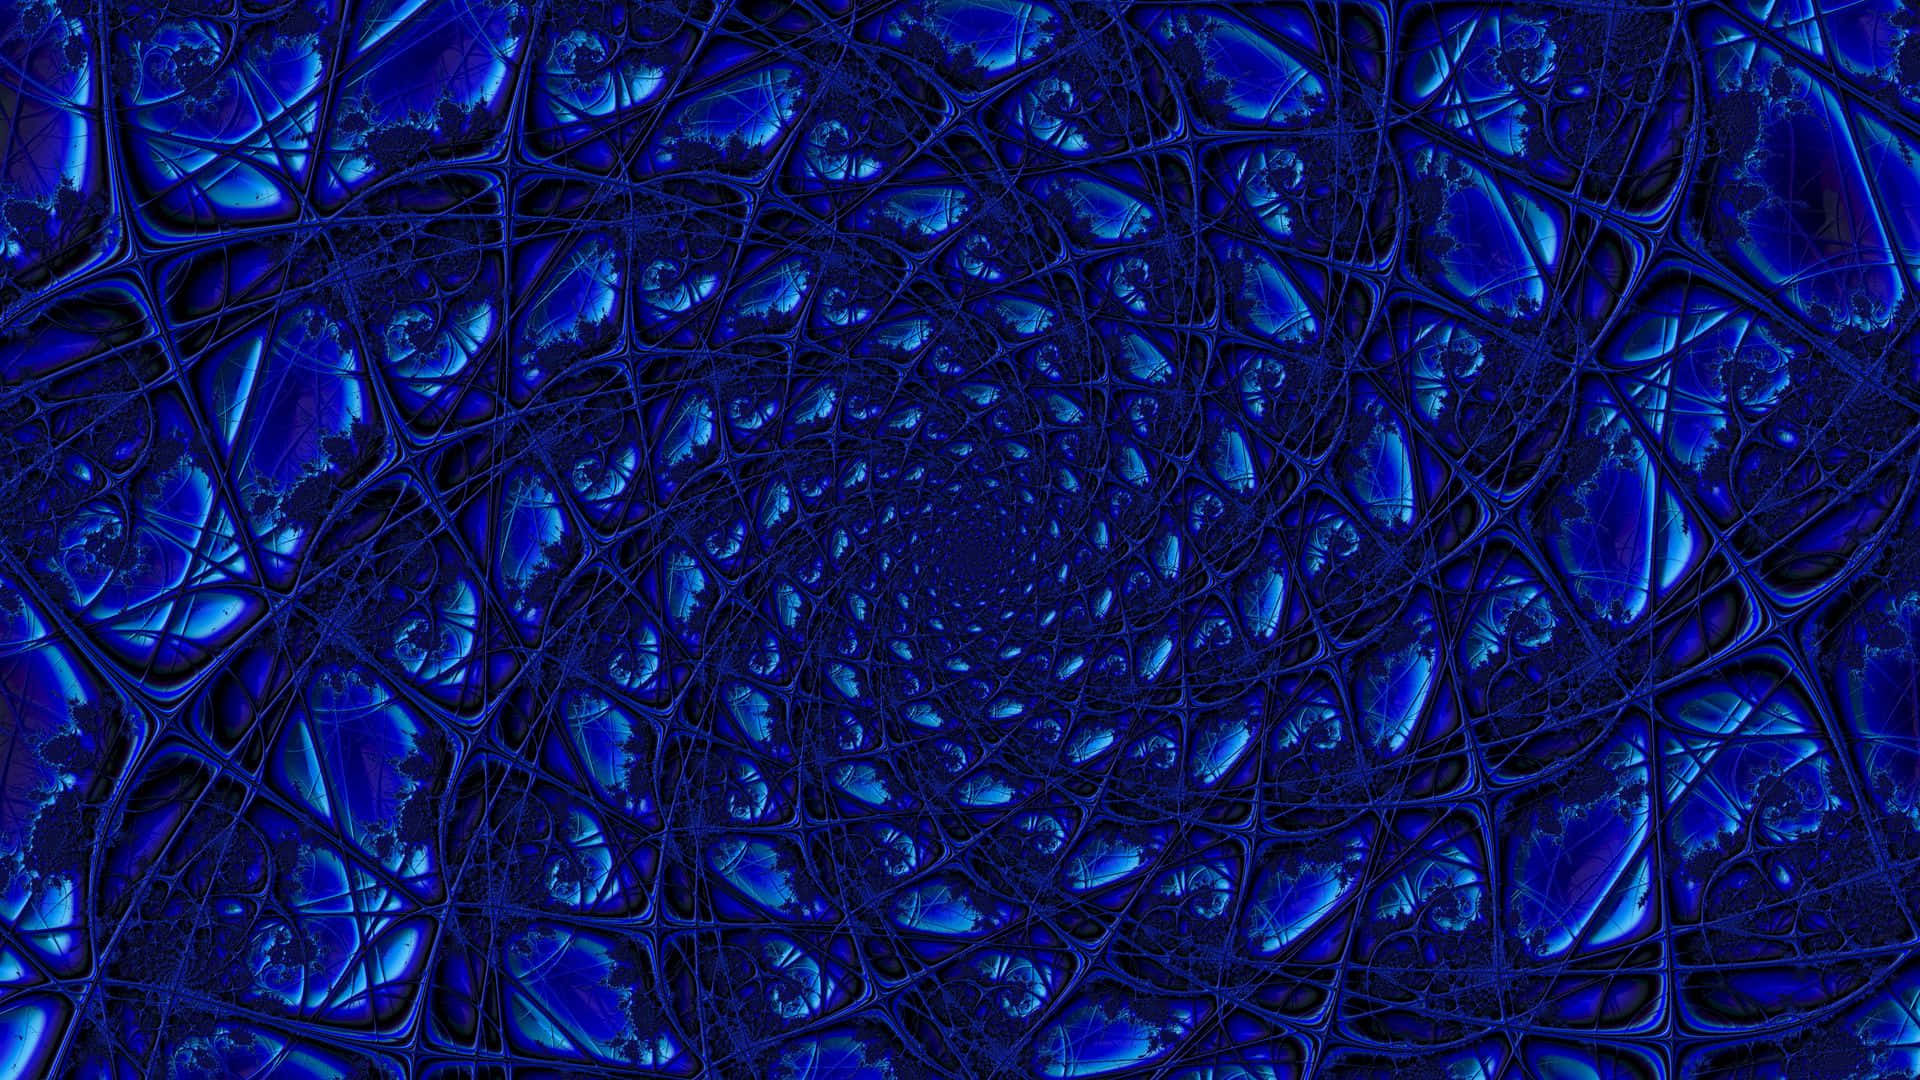 Abstract Spiral Pattern Blue PC Wallpaper